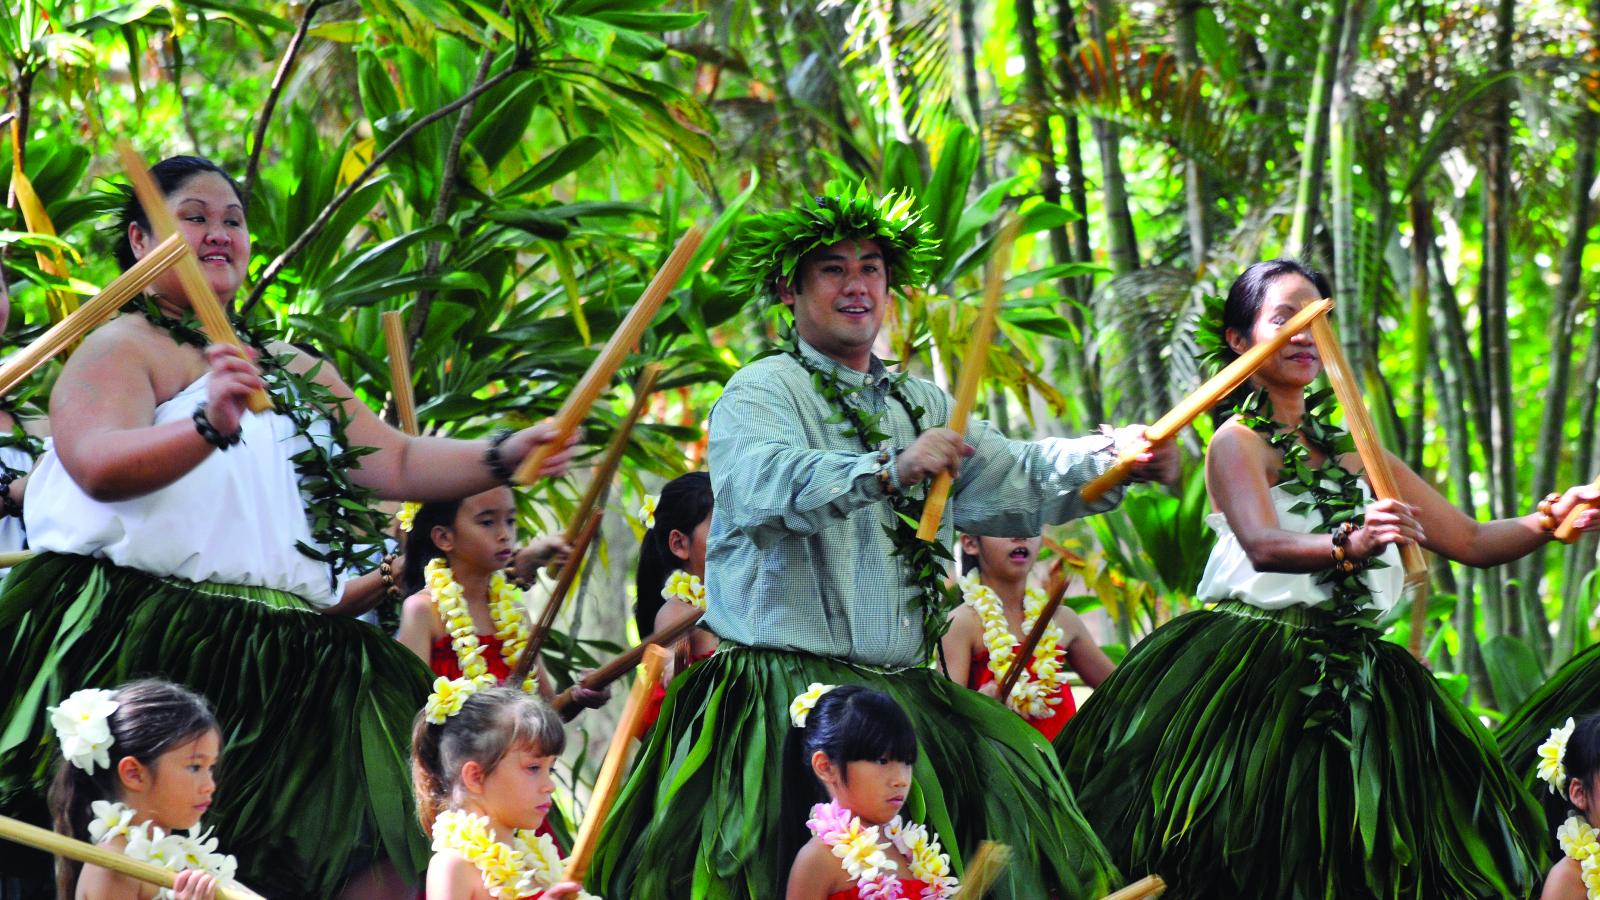 Reclaiming the Culture through Hula | National Endowment for the Arts